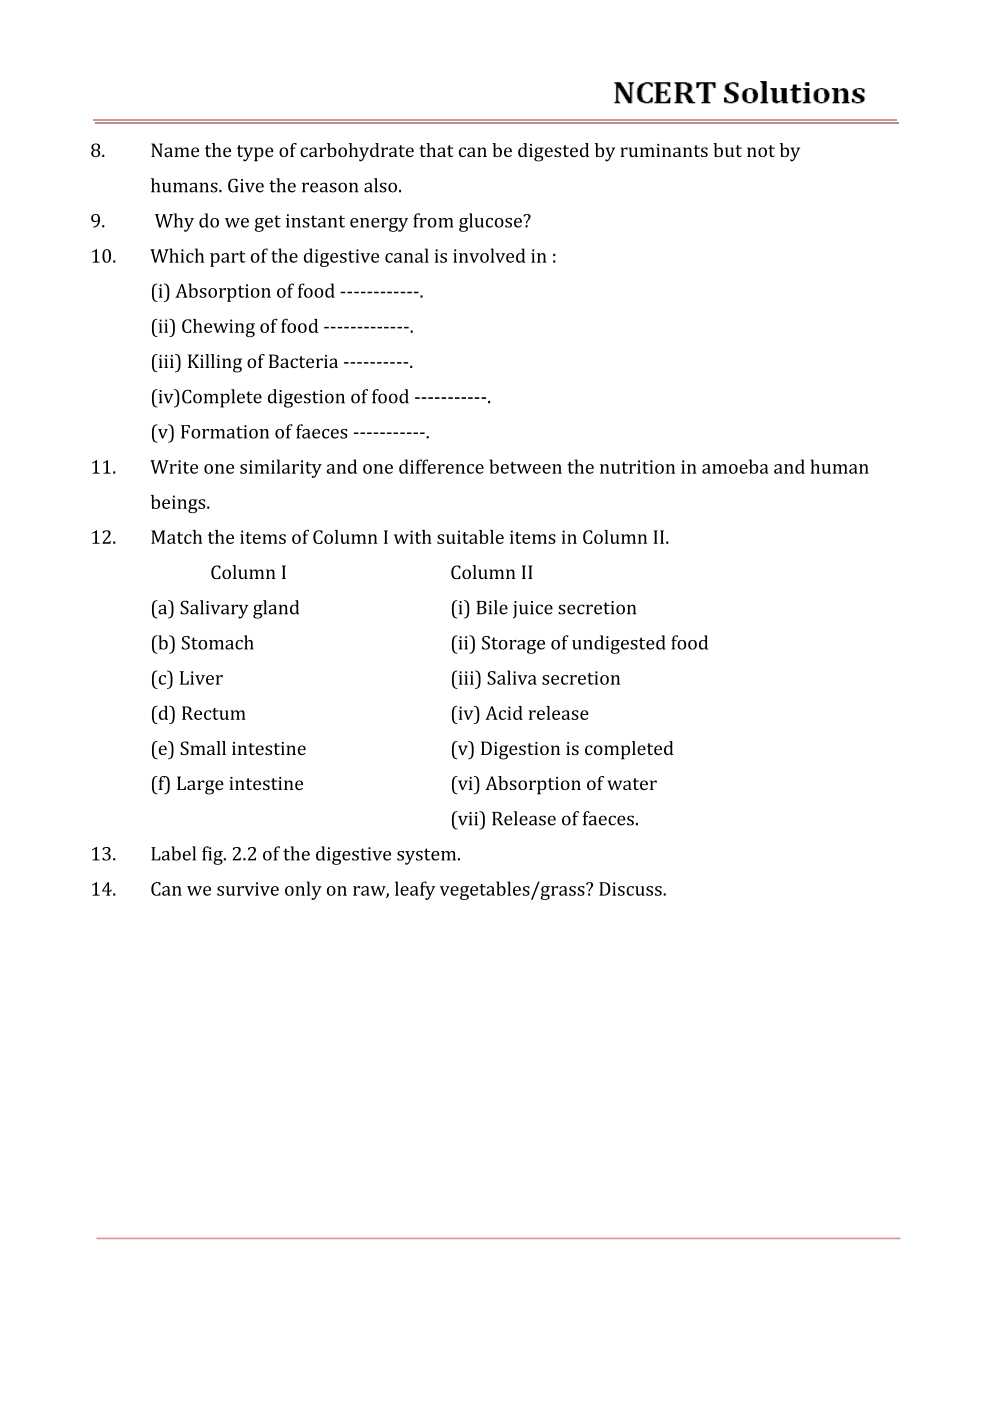 NCERT Solutions for Class 7 Science Chapter 2 Nutrition in Animals - Free  PDF